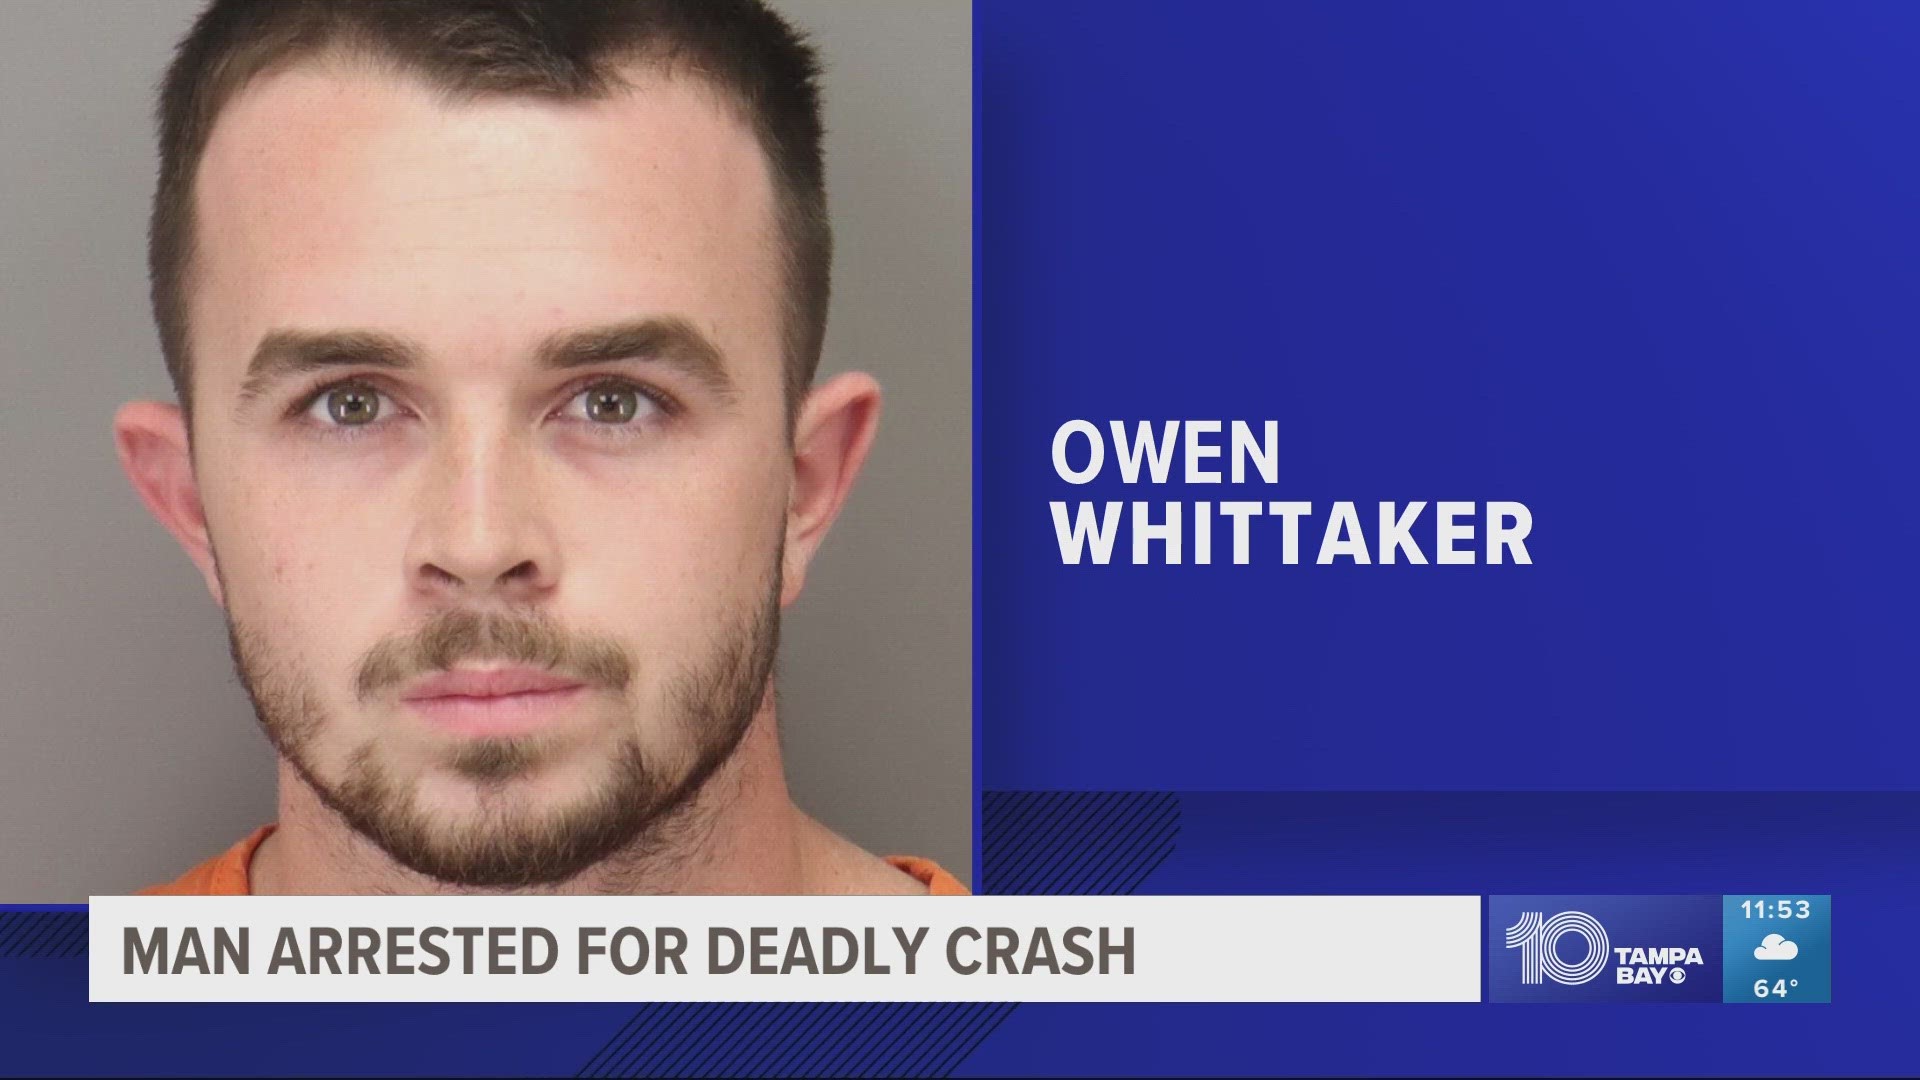 Owen Whittaker, 21, was charged with vehicular homicide.